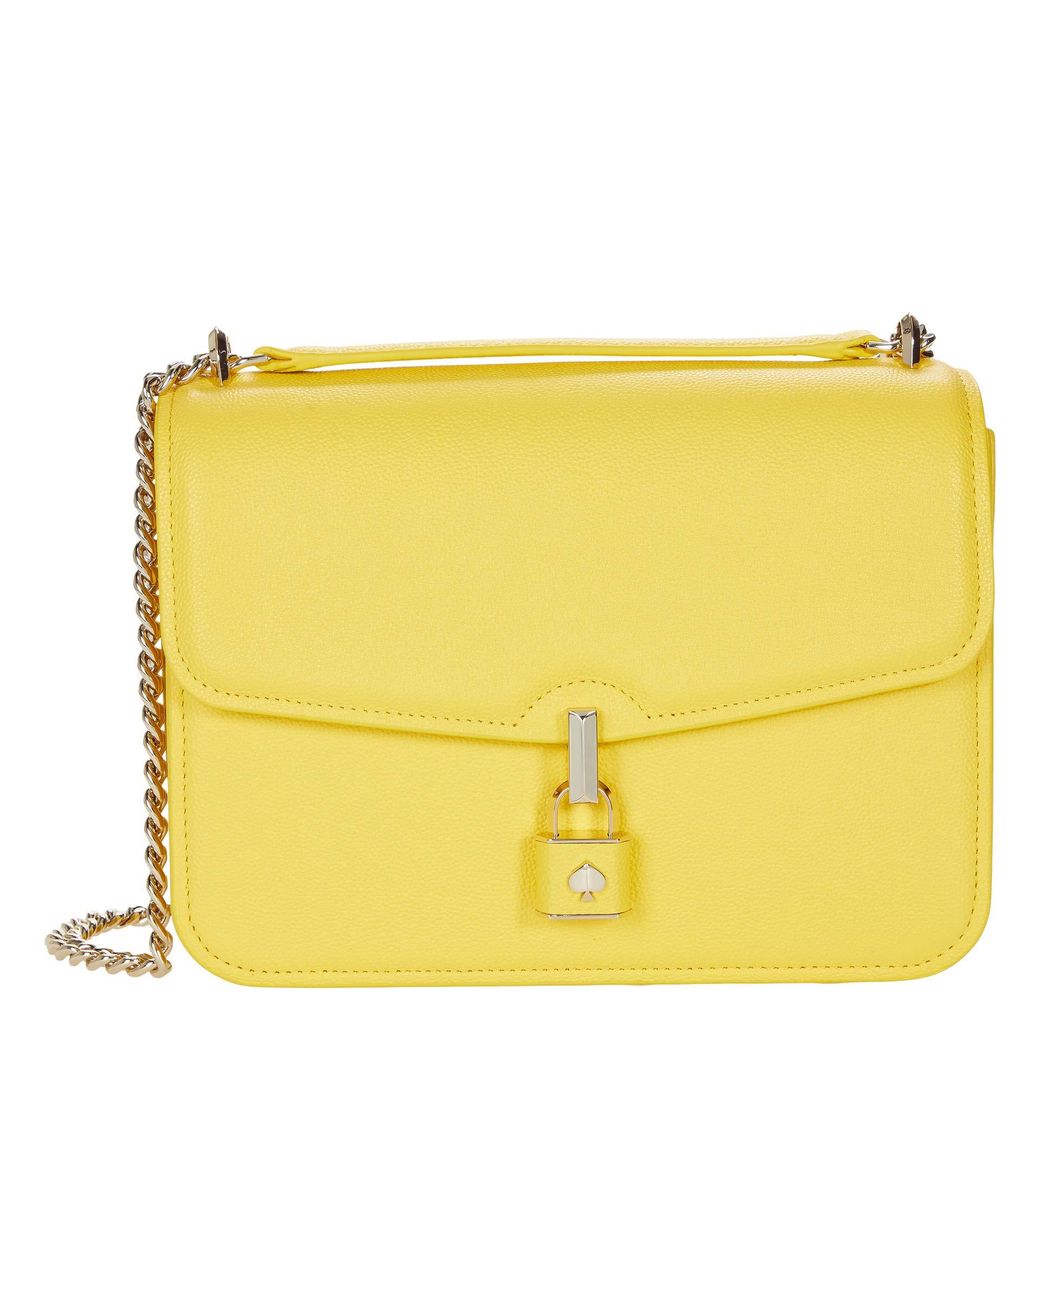 Kate Spade Leather Locket Large Flap Shoulder Bag in Yellow - Lyst